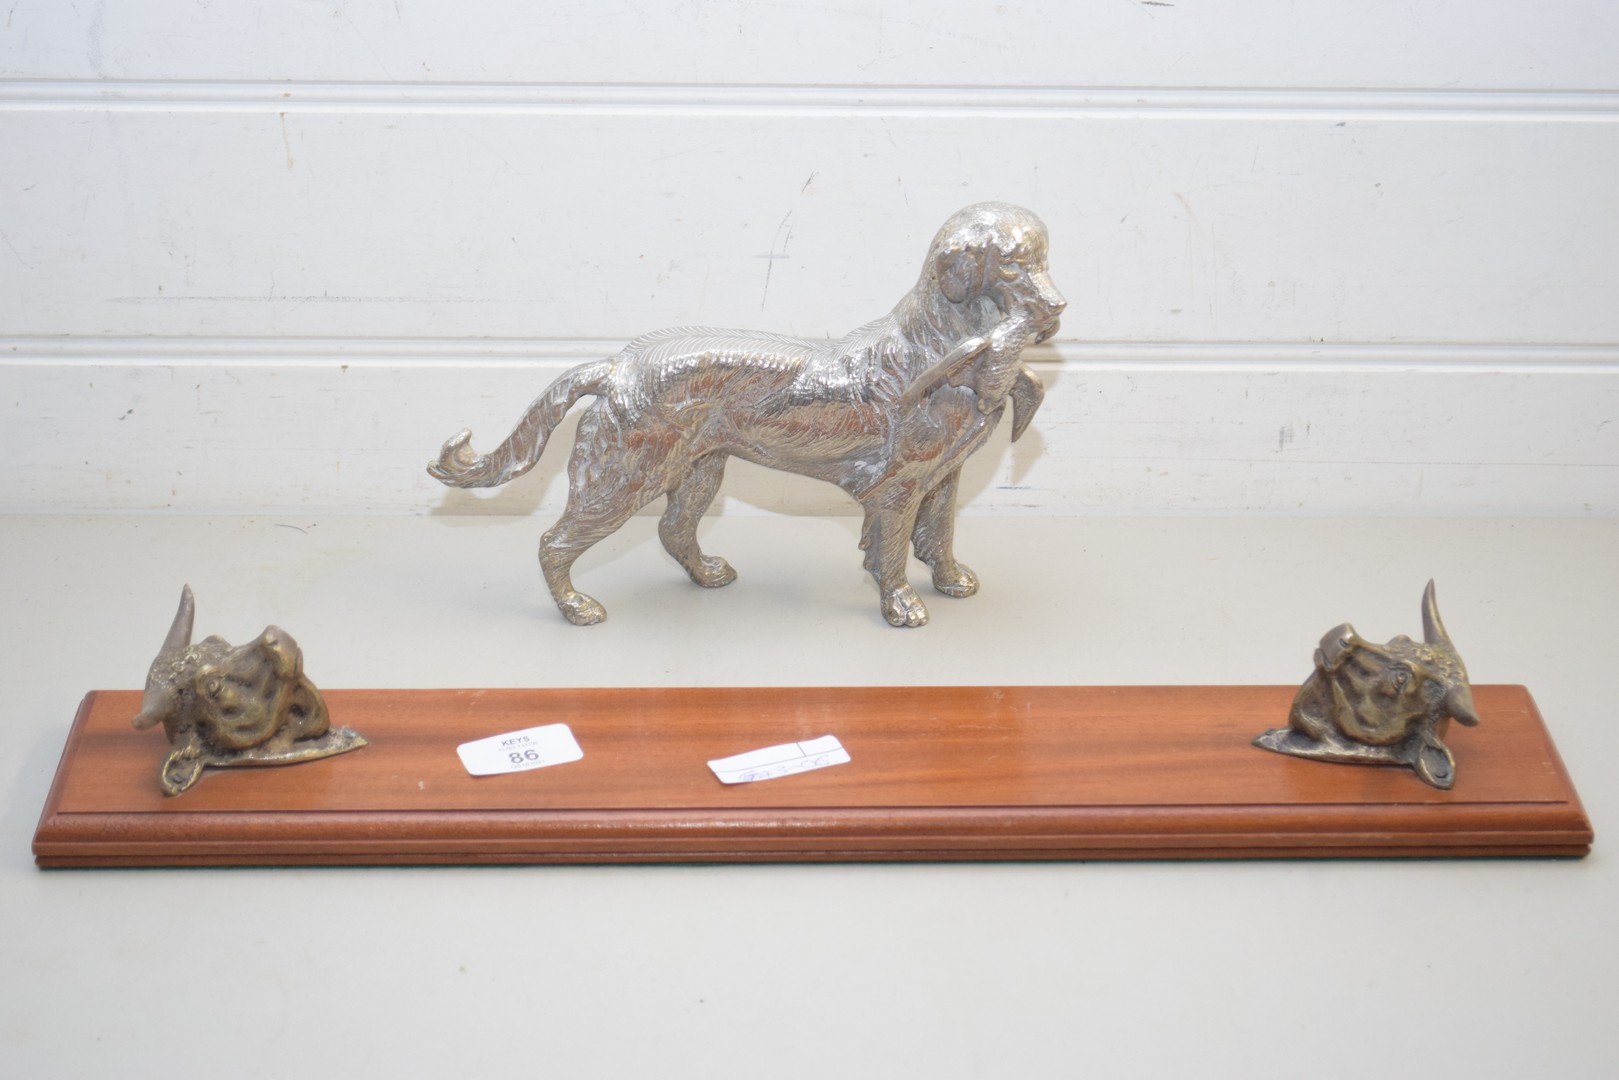 SILVER PLATED MODEL OF A DOG TOGETHER WITH A BULLS HEAD AND WOOD MOUNTED CARVING SET STAND